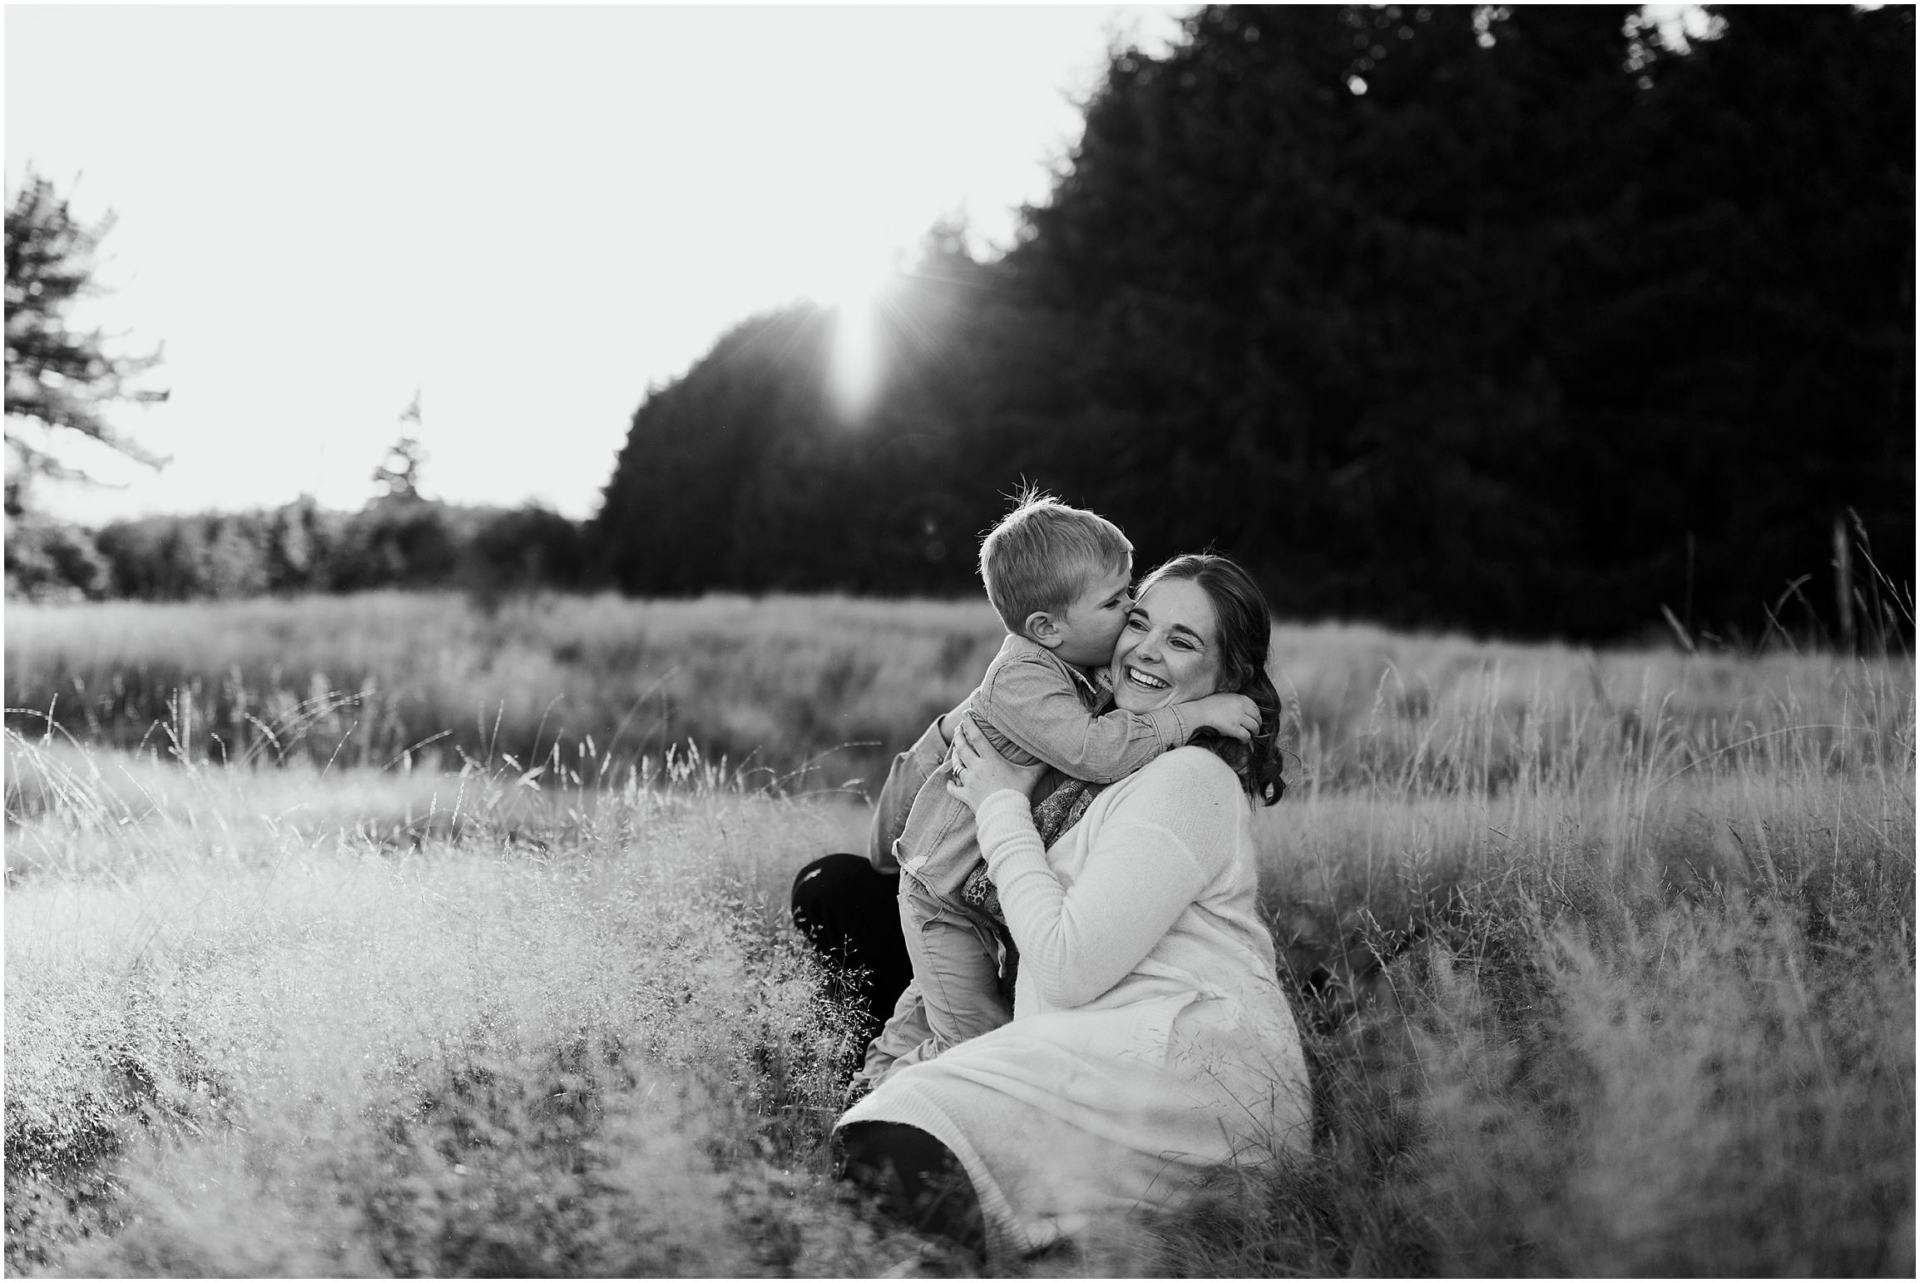 Charlotte Kiri Photography - Family Photography of a mother cuddling her son as he kisses her cheek in a field as the sun goes down behind a line of trees in Wanaka, New Zealand.